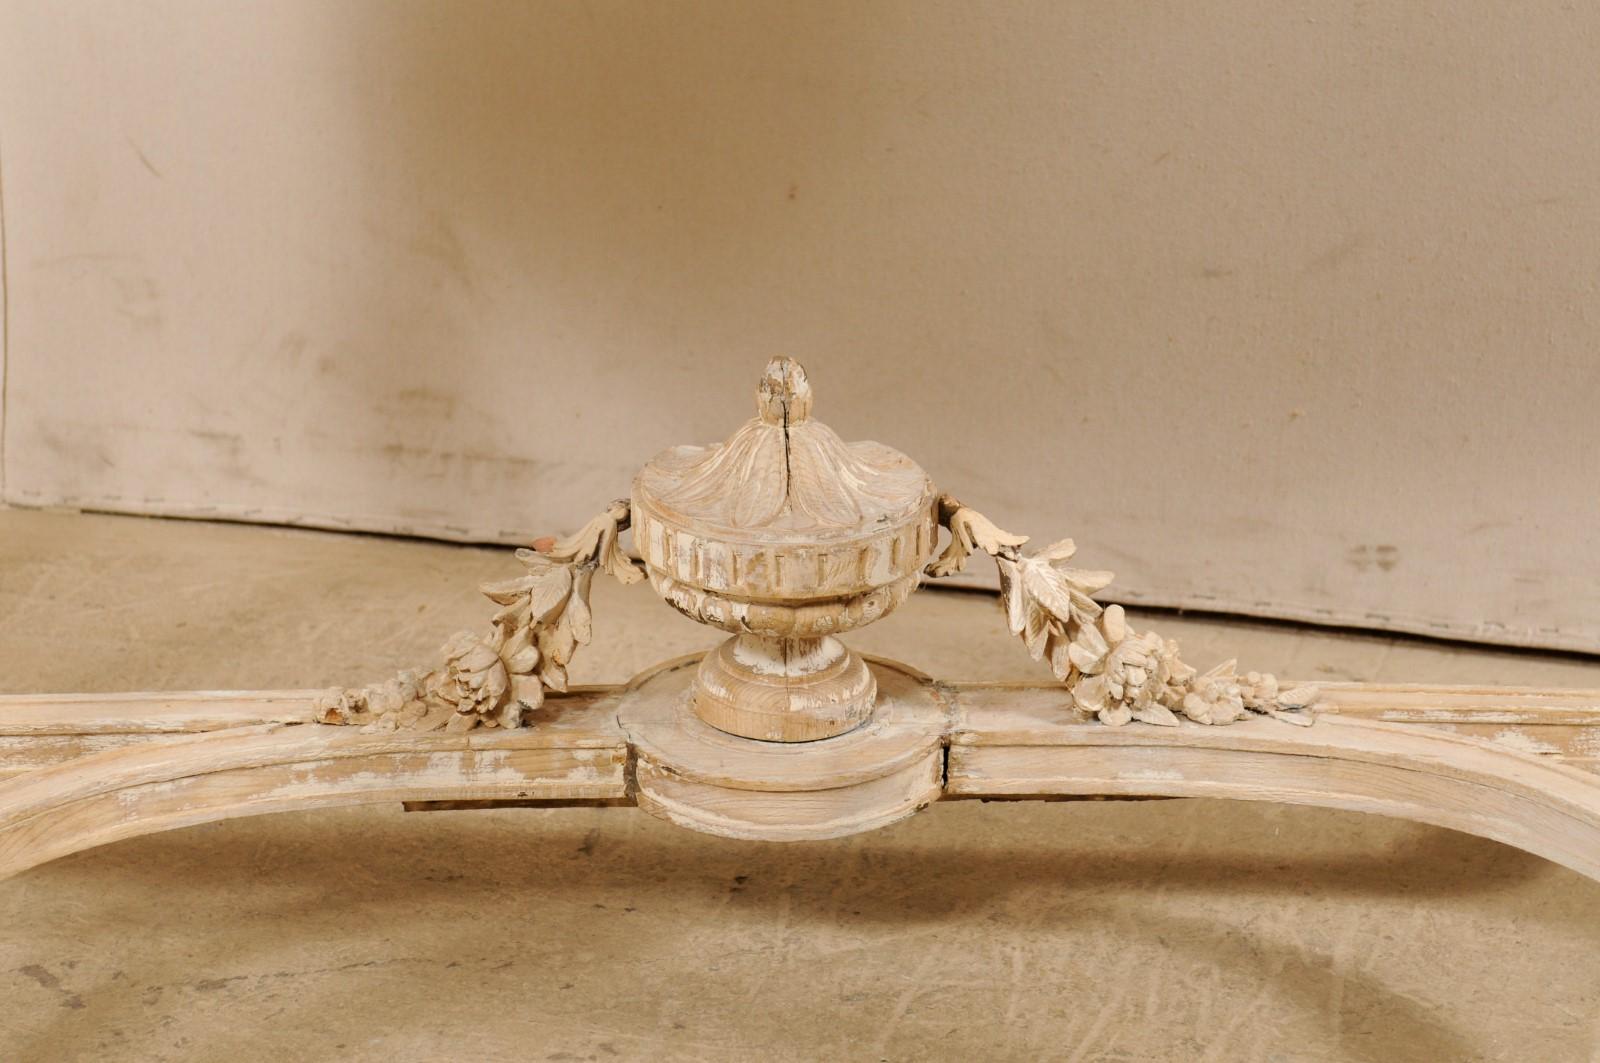 Antique French Marble-Top Console Table with Carved Urn & Foliage at Underside 3